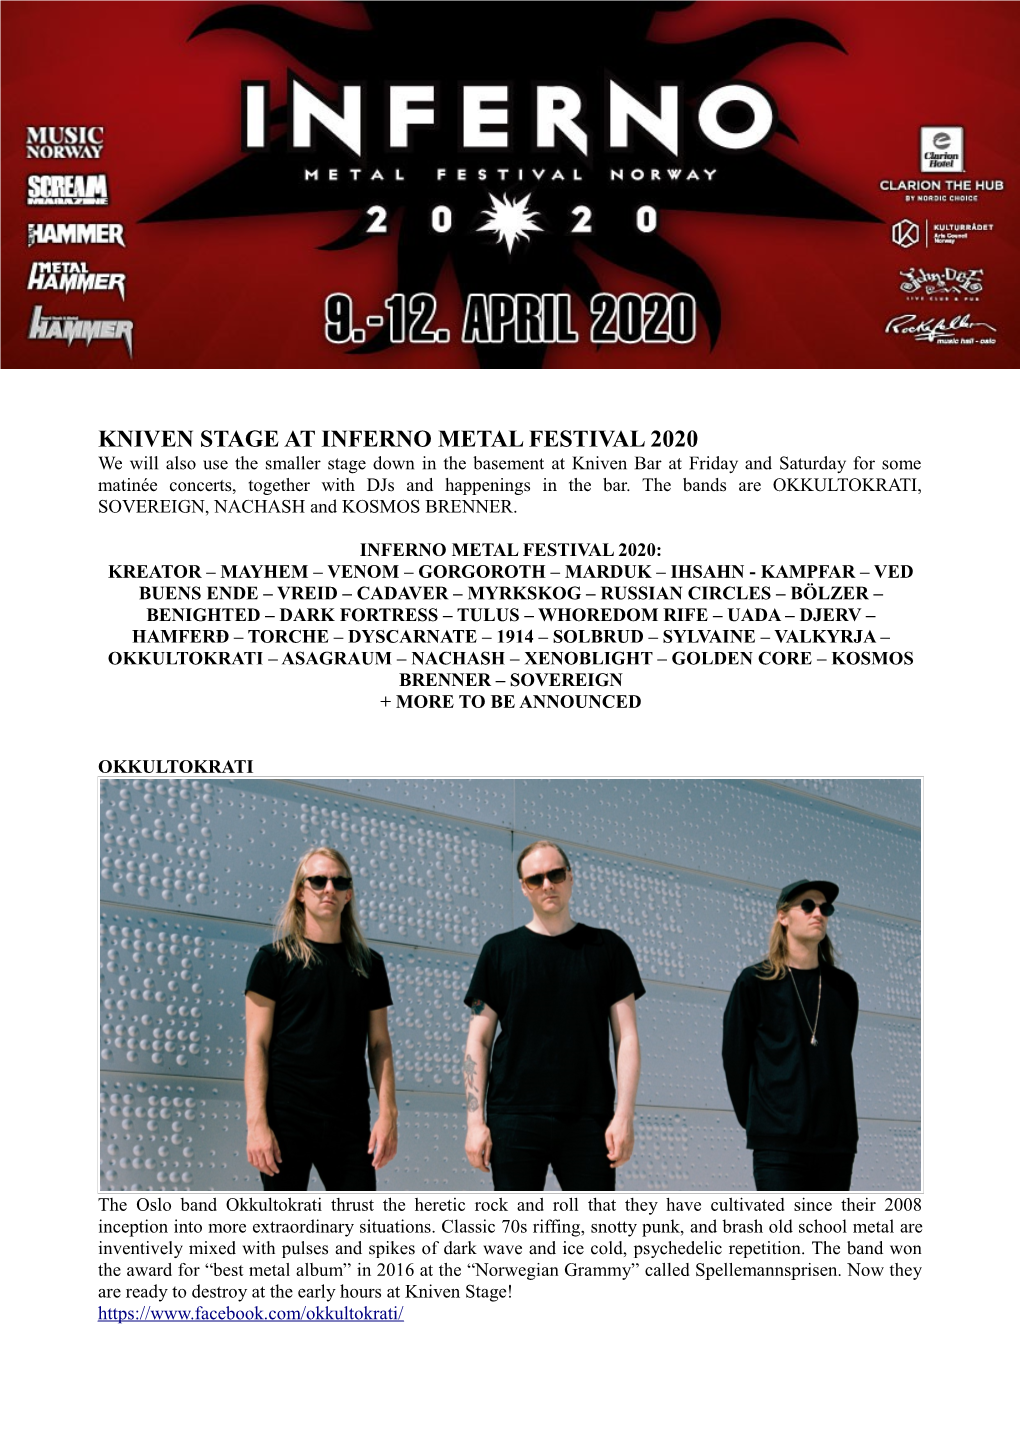 Kniven Stage at Inferno Metal Festival 2020